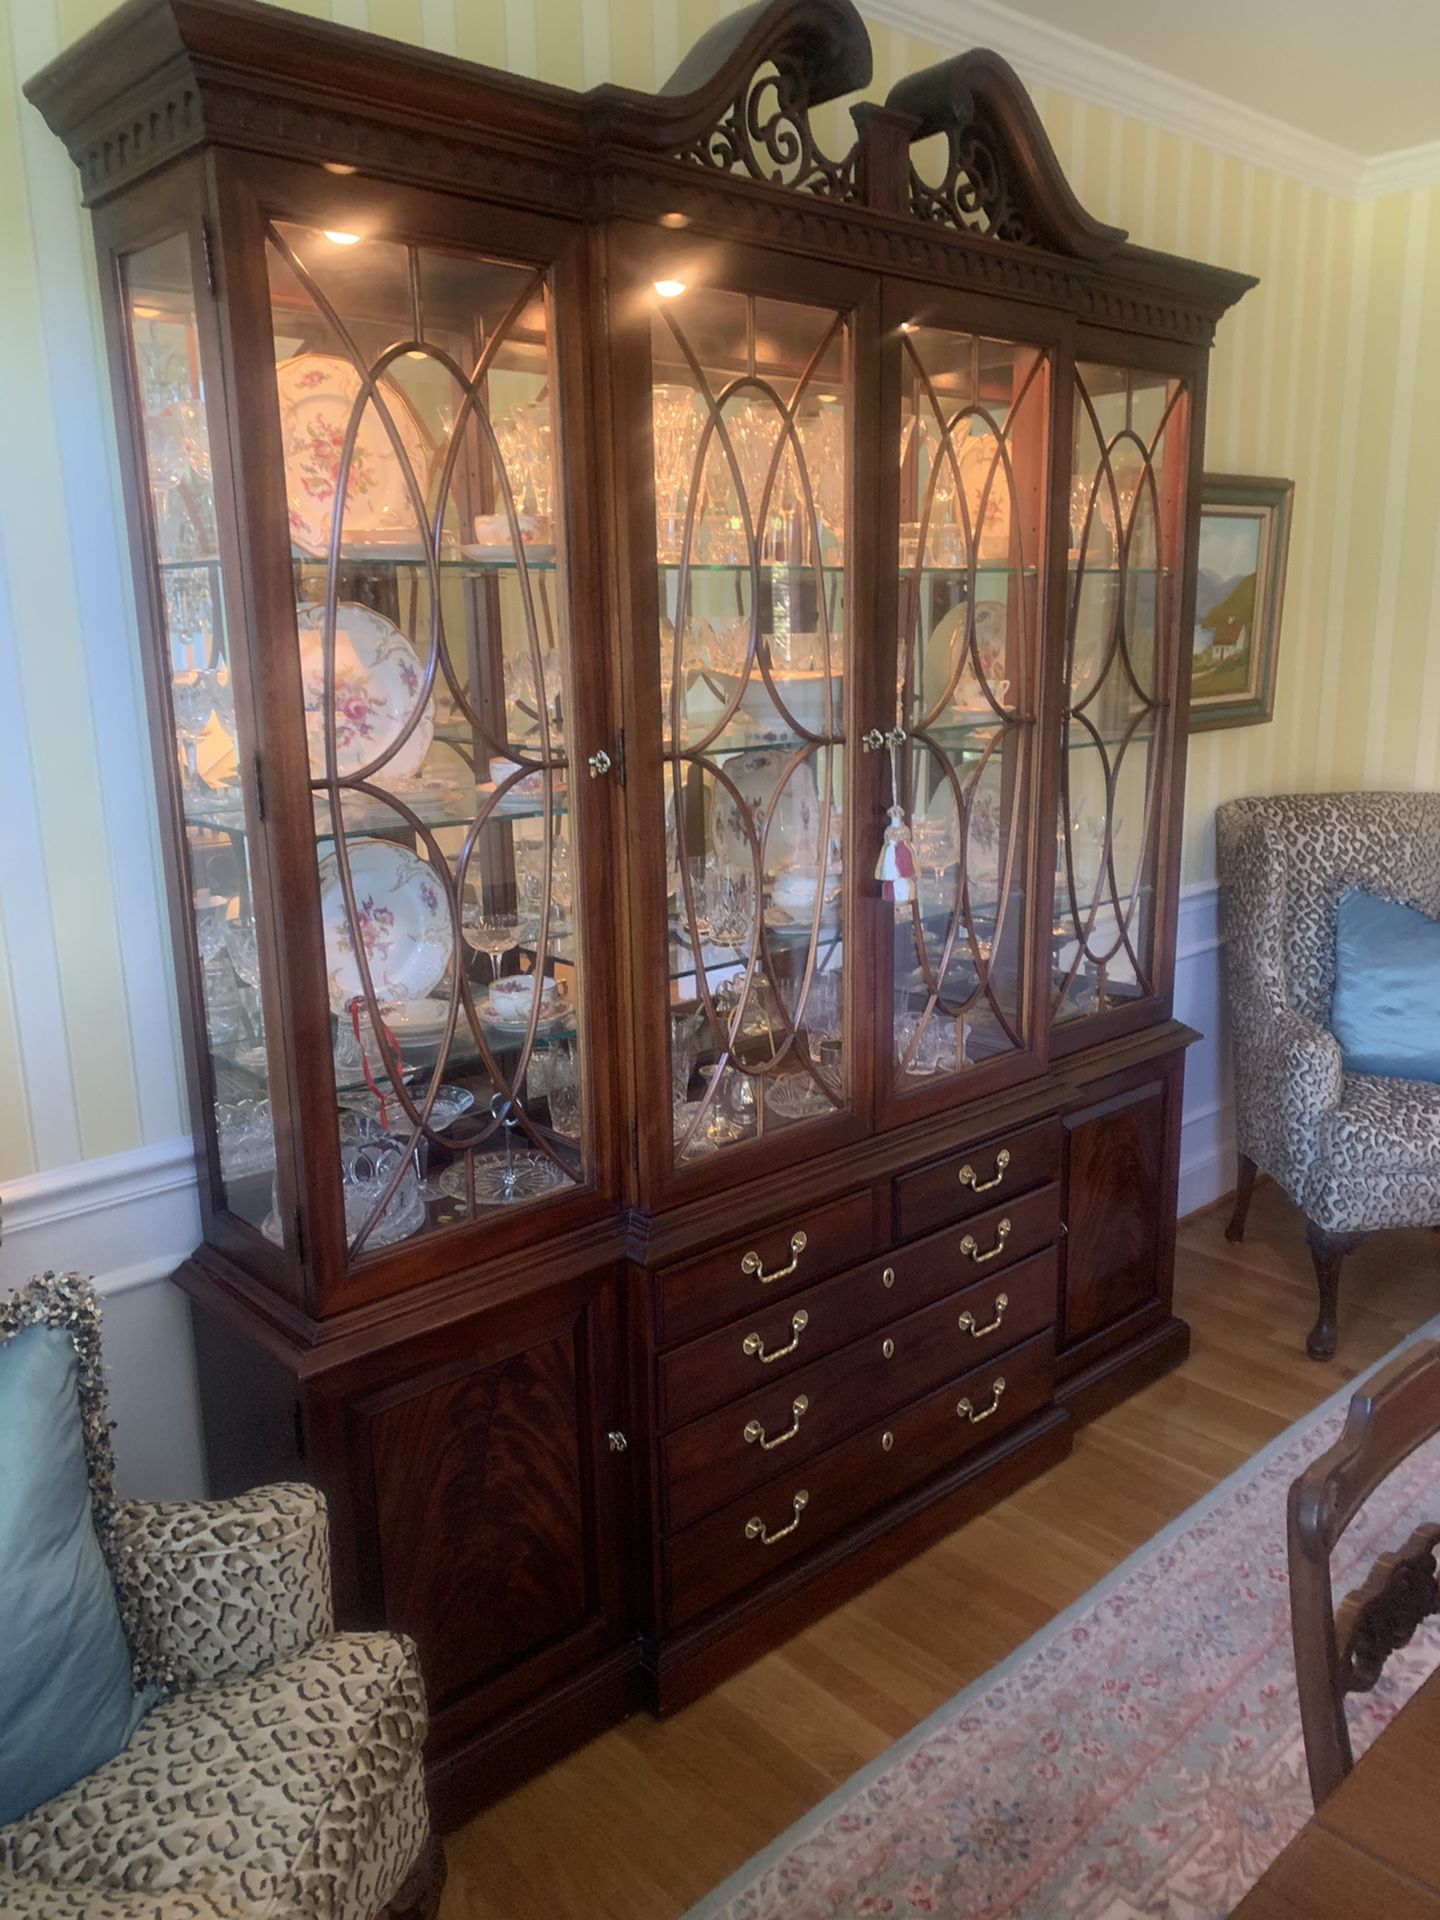 Thomasville china cabinet. Gone by Wednesday.